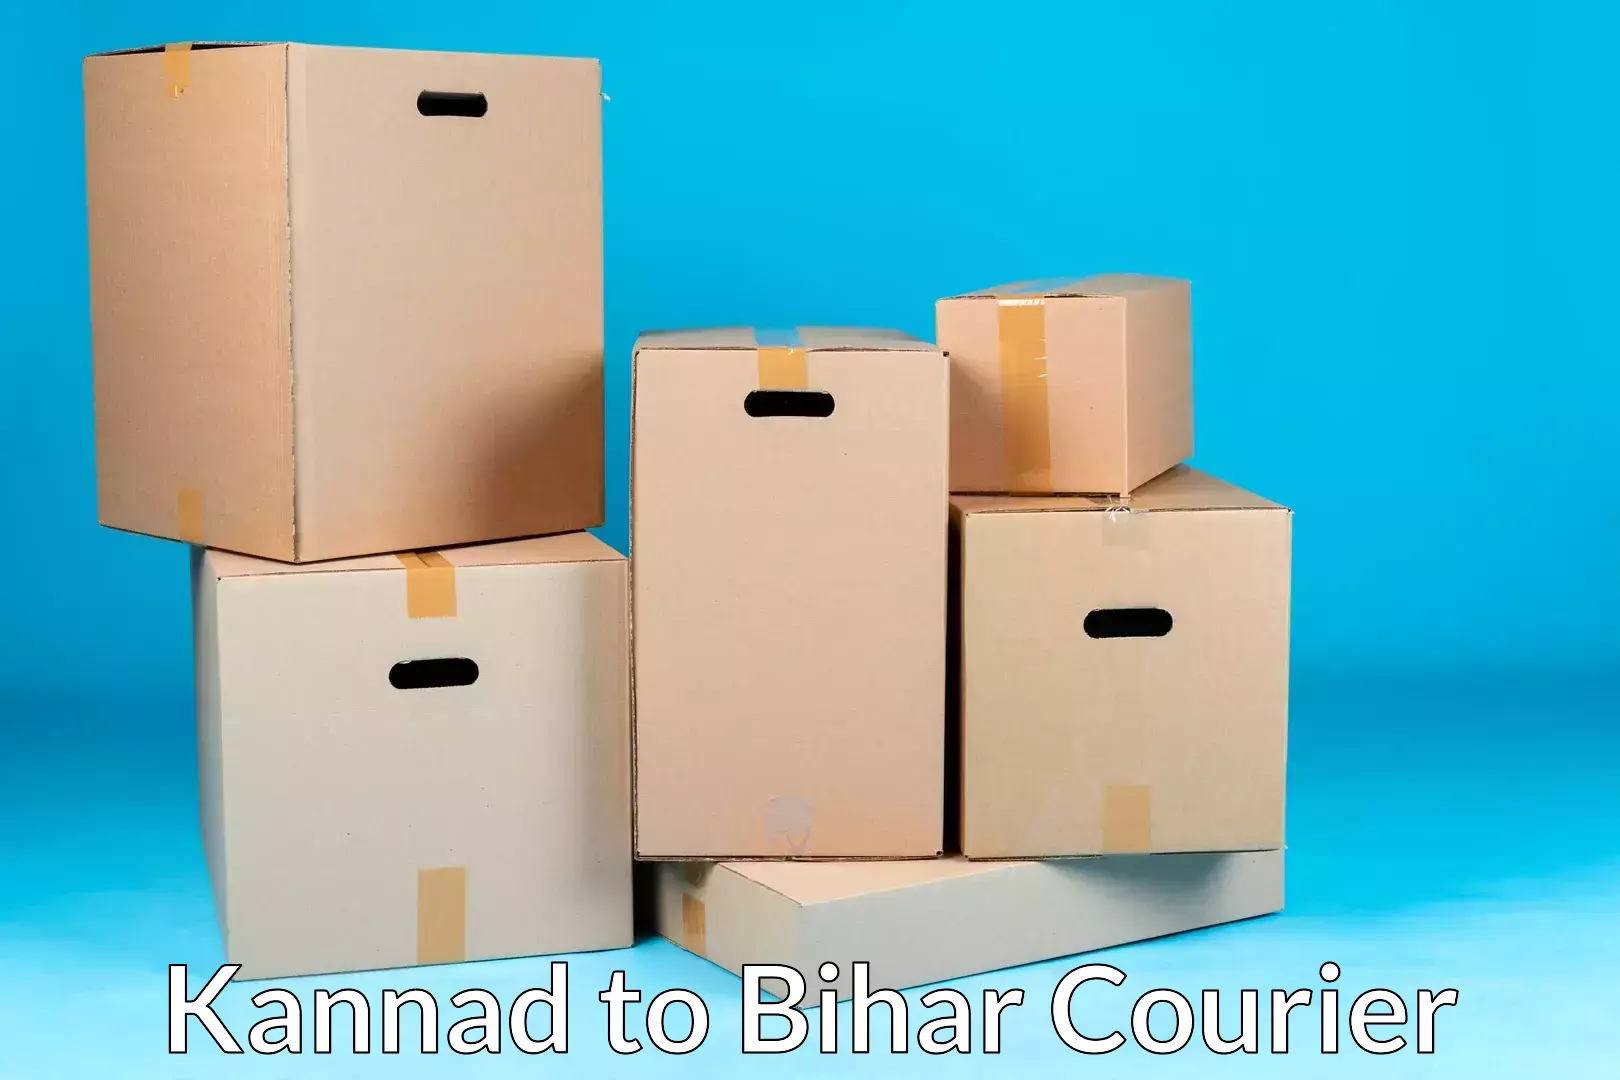 Seamless moving process in Kannad to Bihar